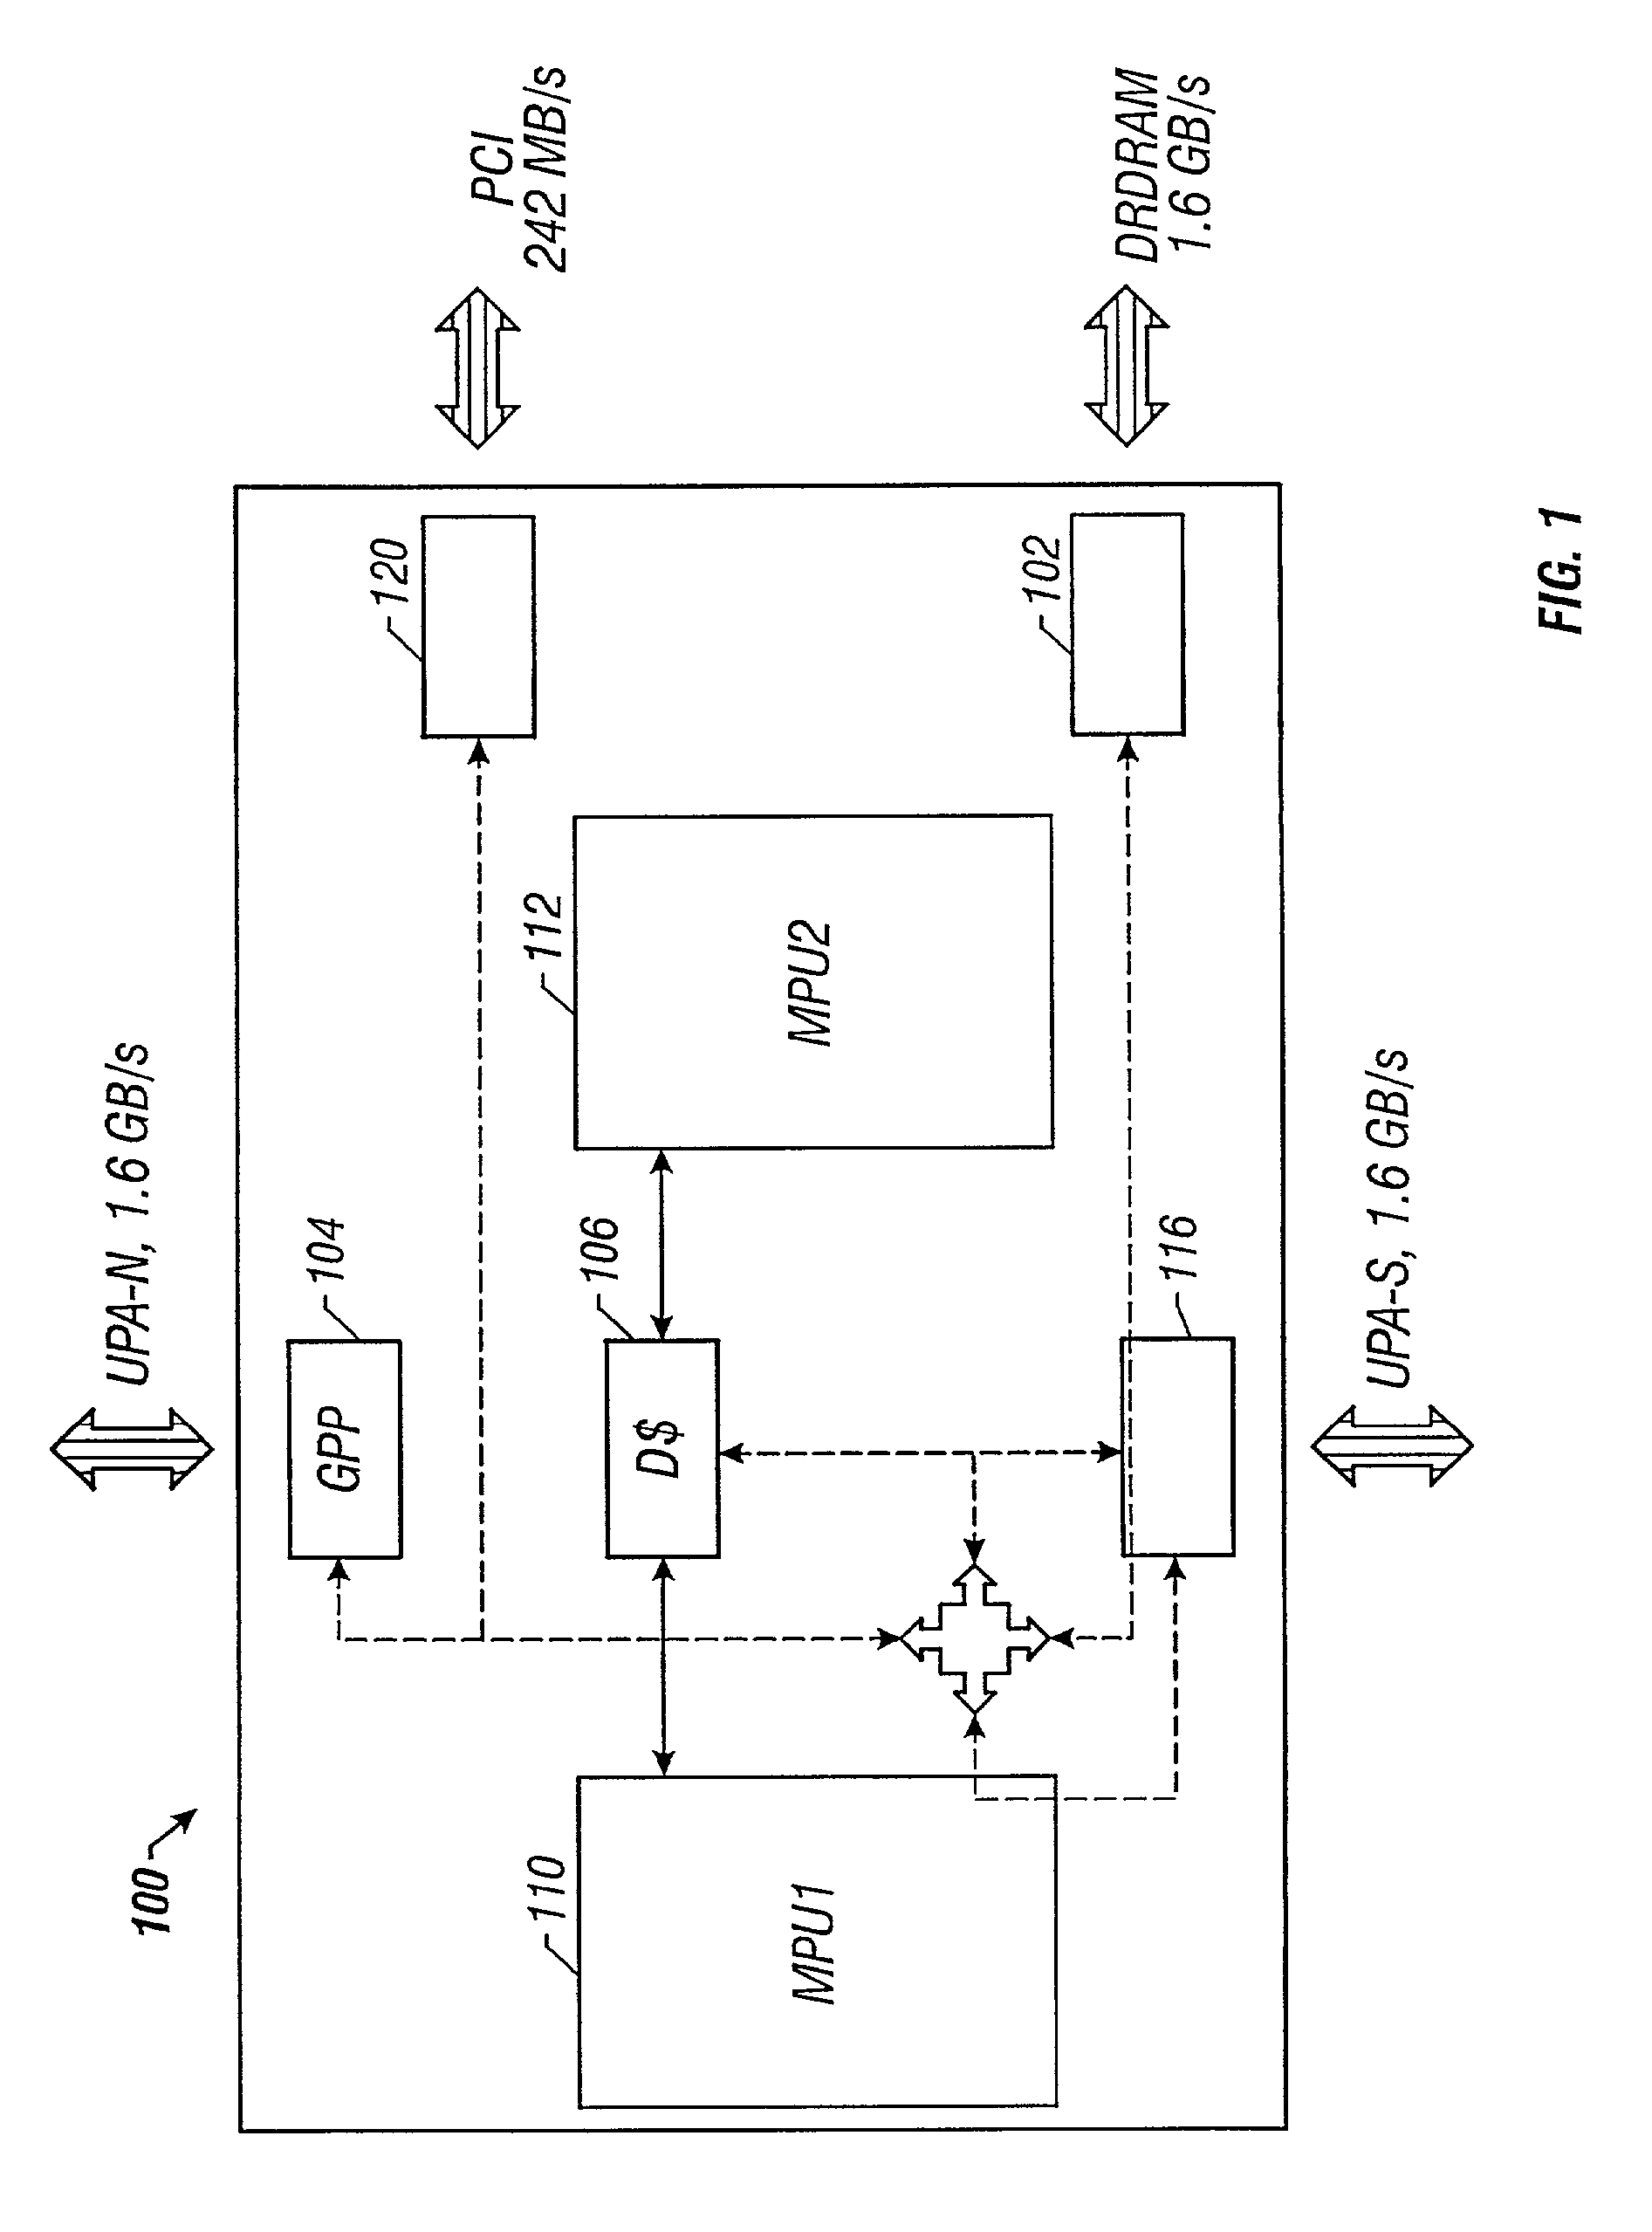 Efficient handling of a large register file for context switching and function calls and returns